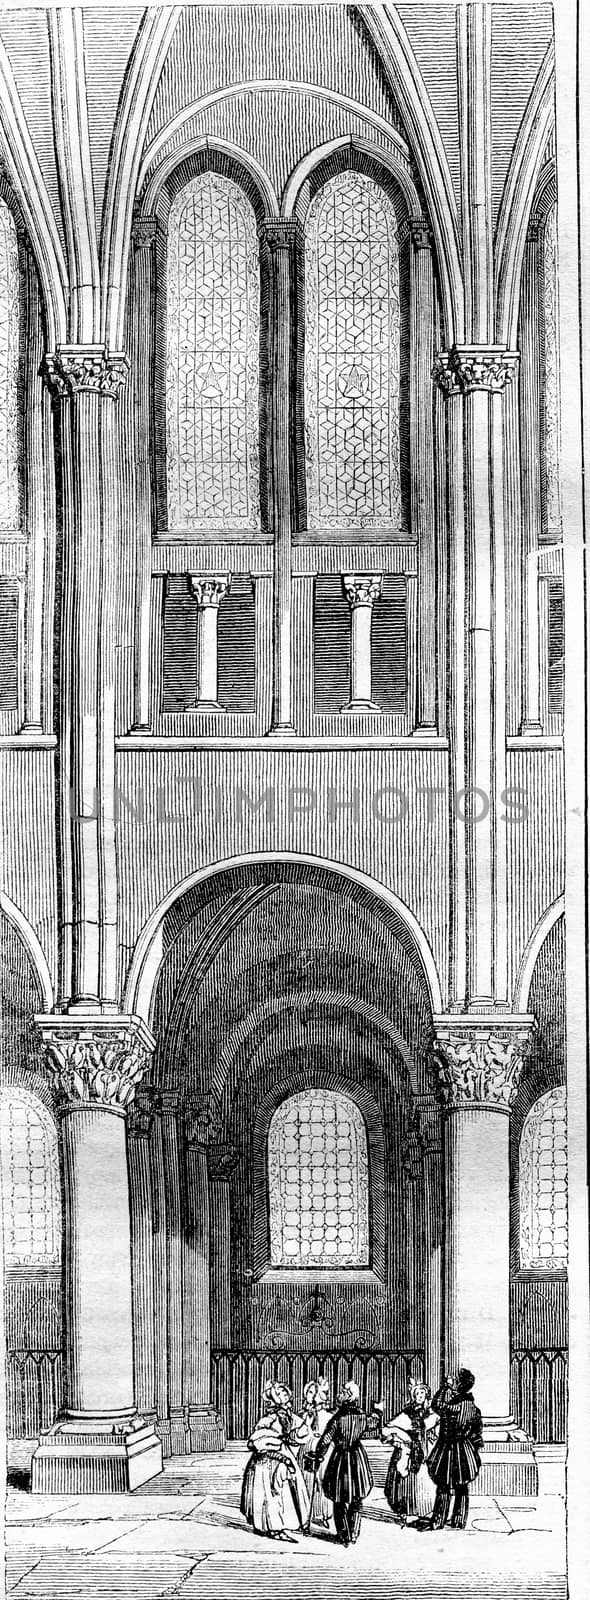 Twelfth century, Span of the apse of Saint Germain des Pres, vintage engraved illustration. Magasin Pittoresque 1836.
